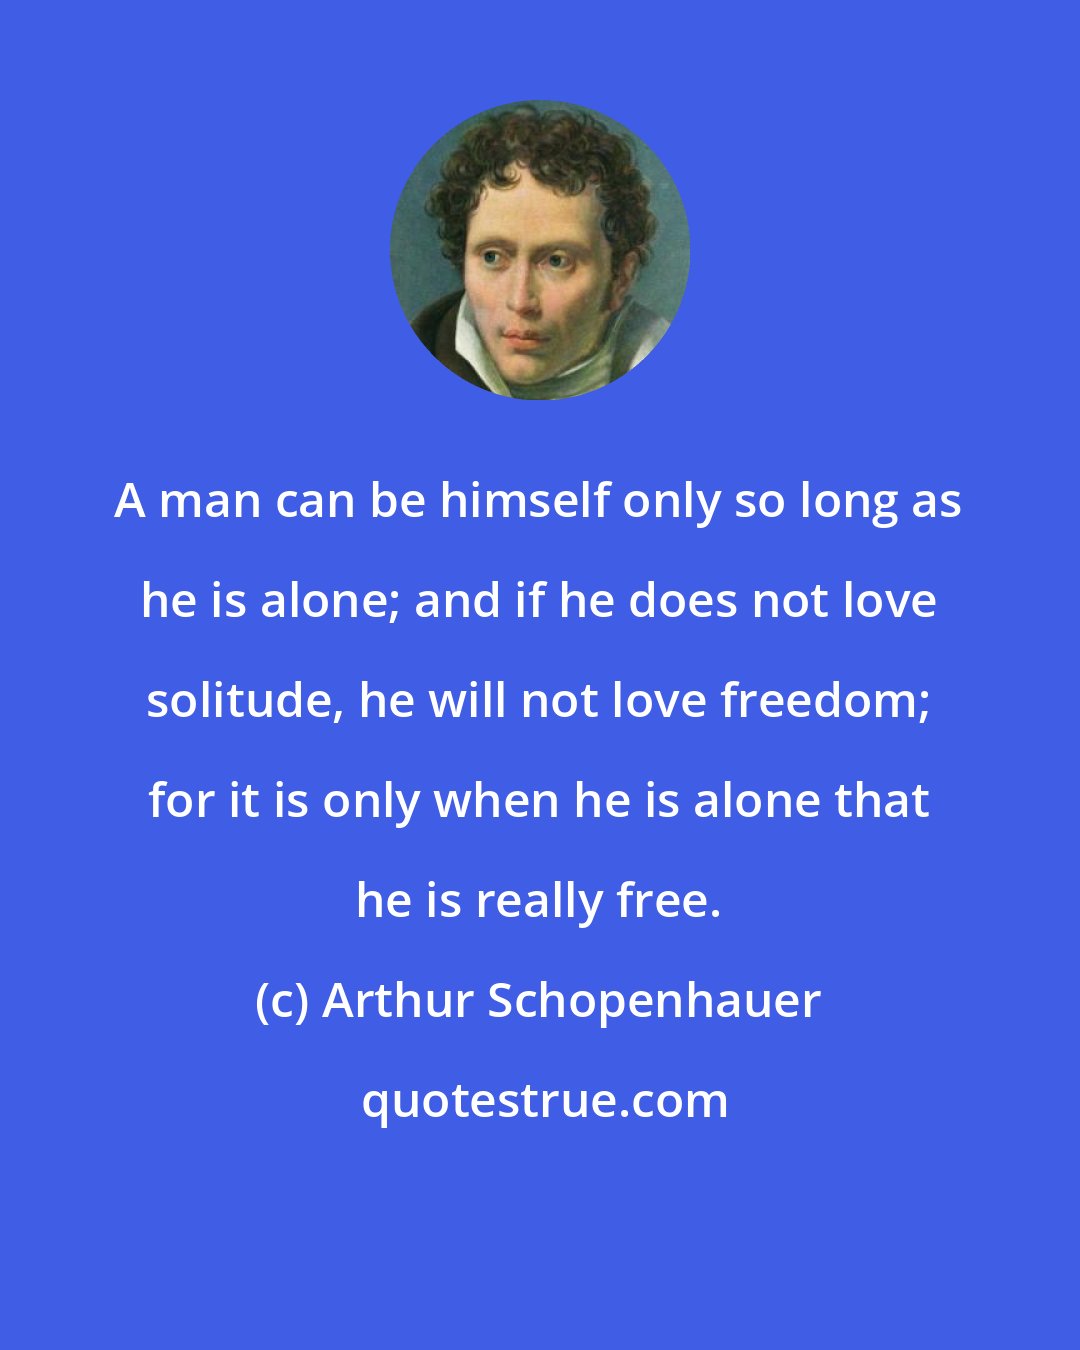 Arthur Schopenhauer: A man can be himself only so long as he is alone; and if he does not love solitude, he will not love freedom; for it is only when he is alone that he is really free.